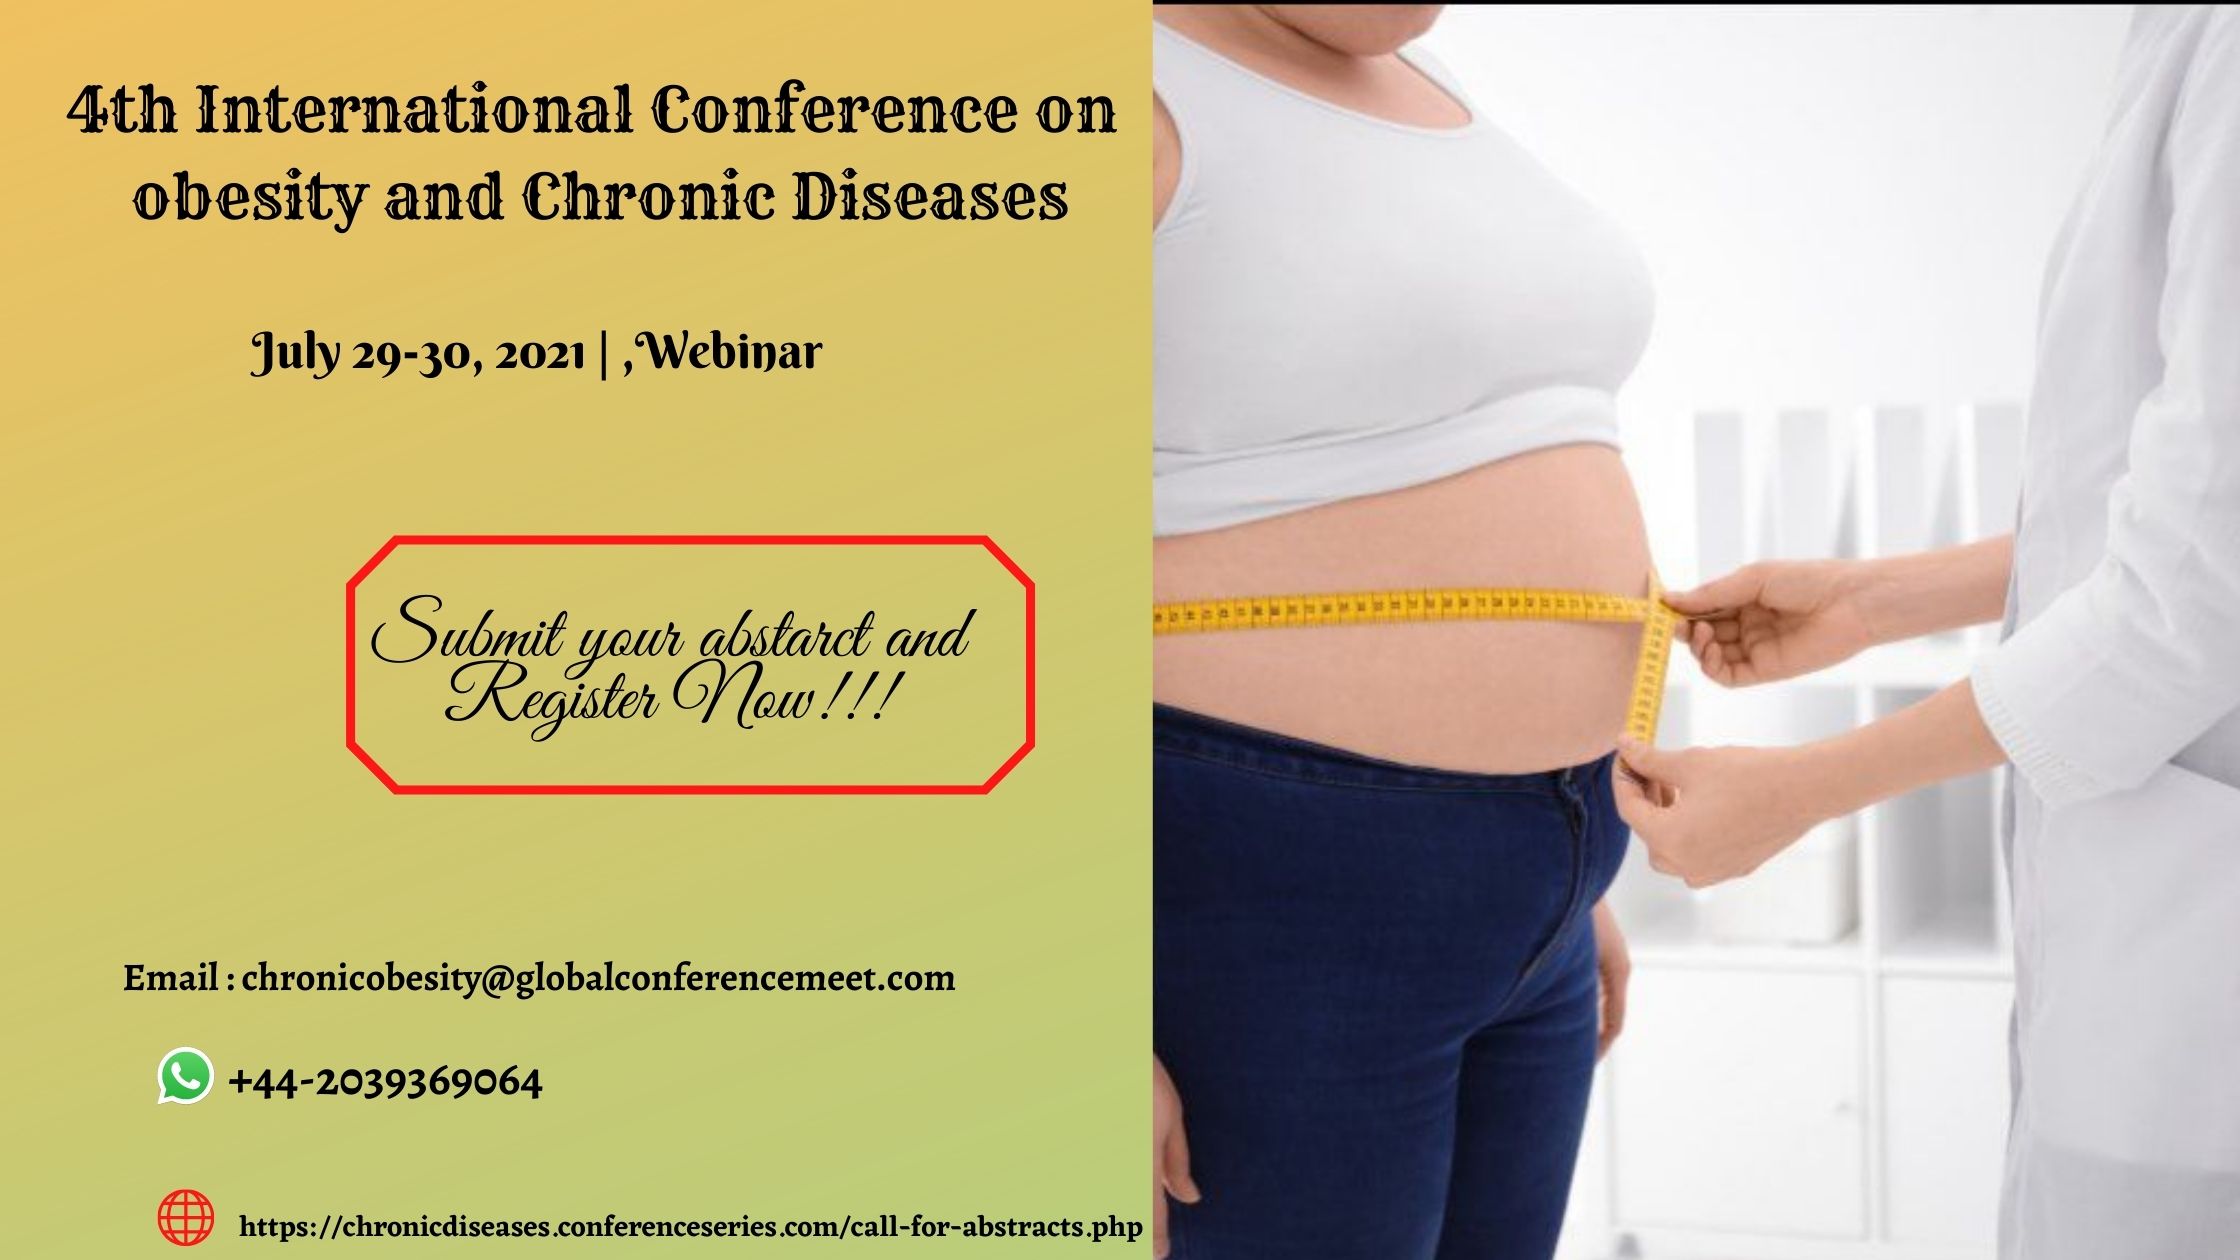 4th International Conference on Obesity and Chronic Diseases, Webinar, France